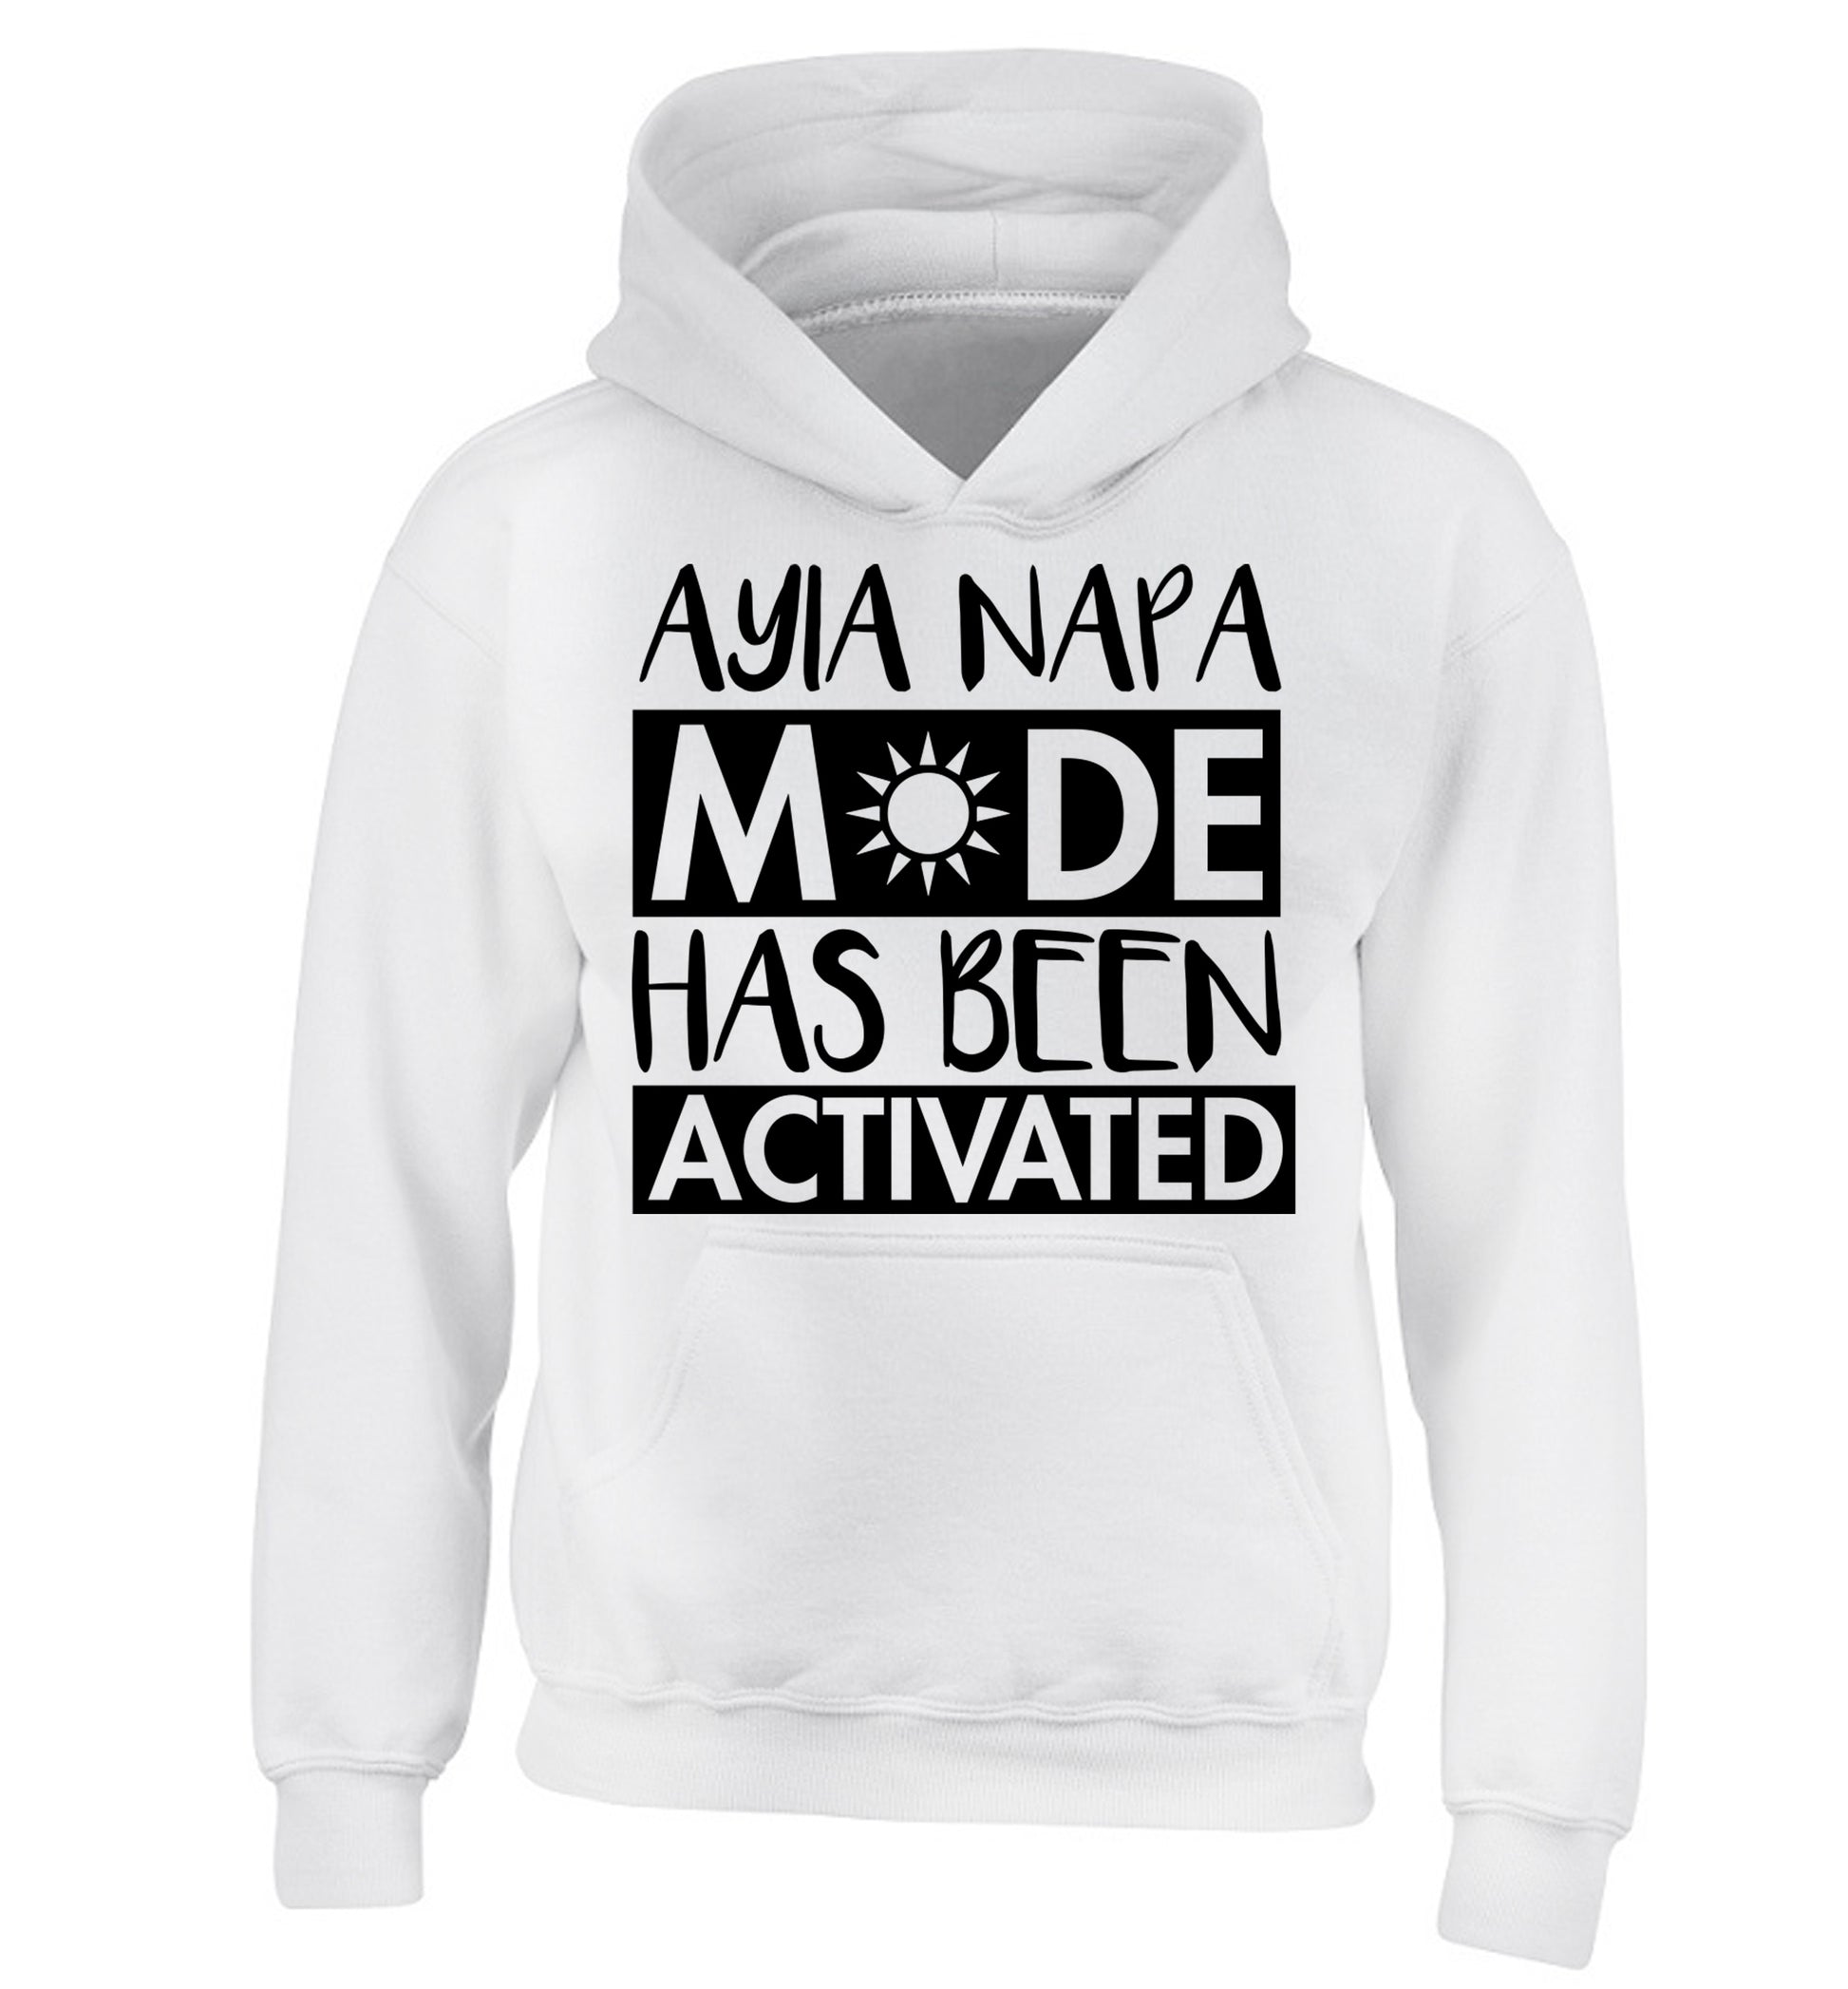 Ayia Napa mode has been activated children's white hoodie 12-13 Years